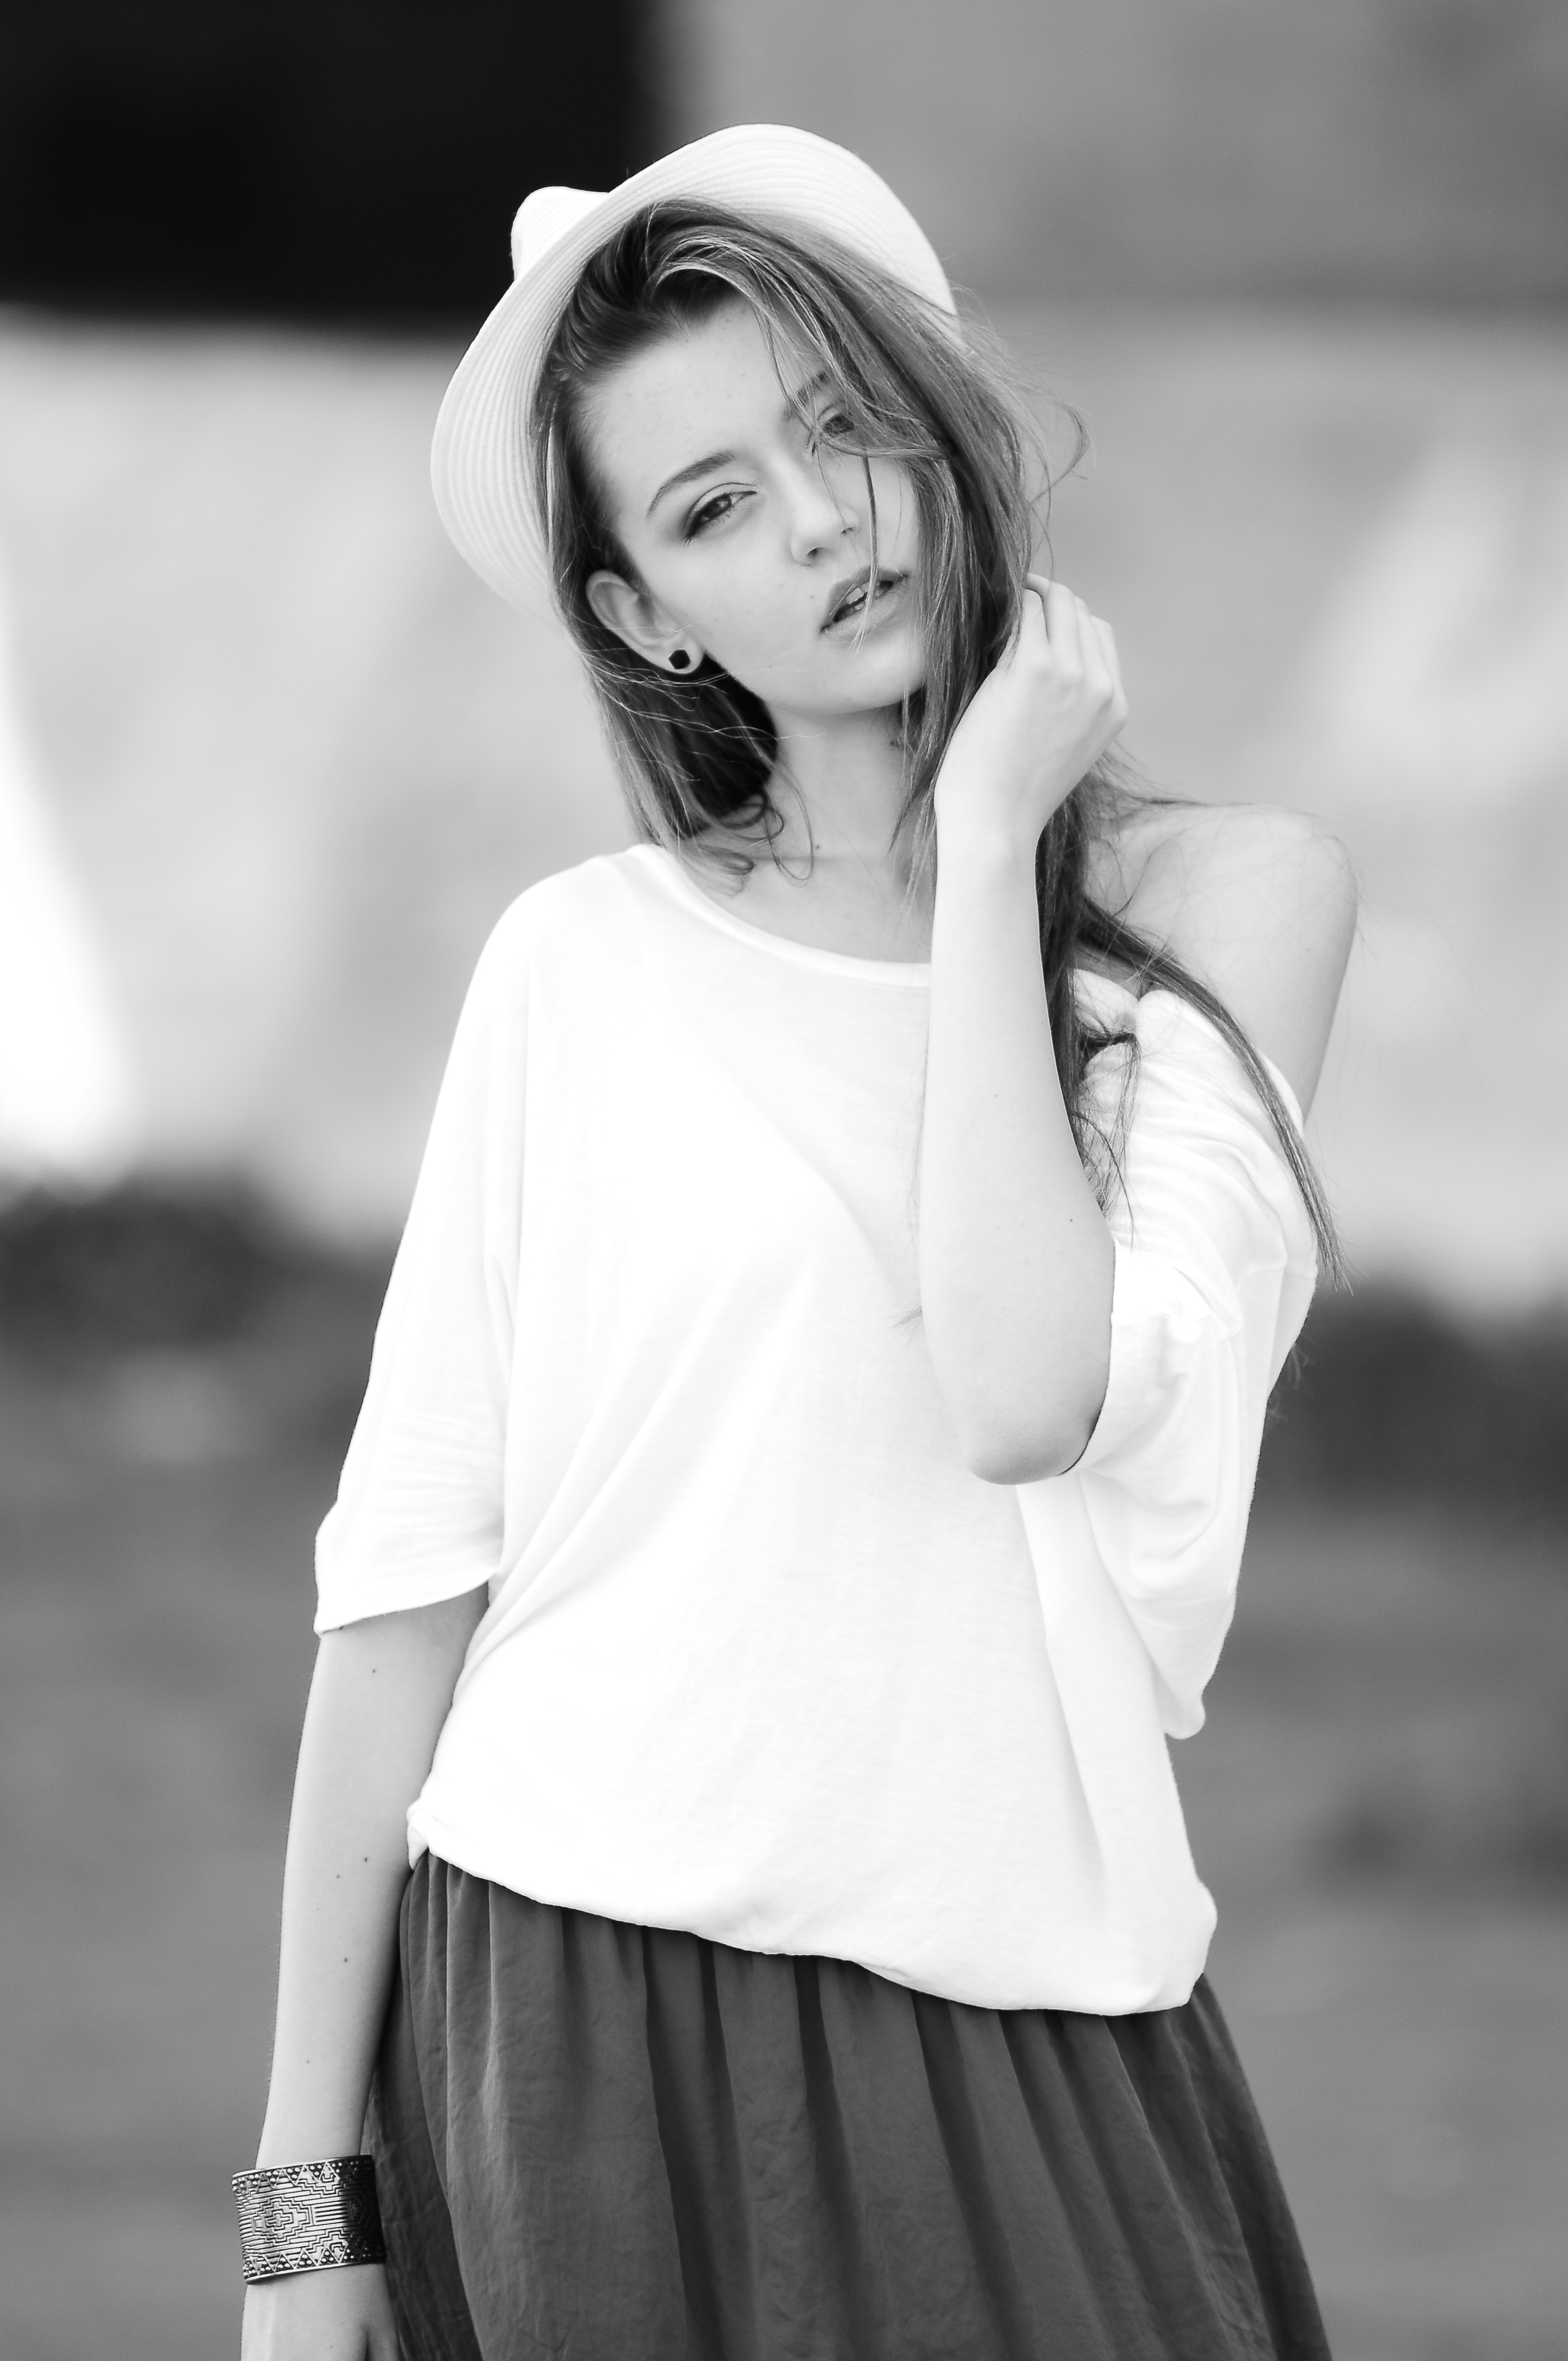 Free photo: Woman Wearing White Off Shoulder Top in Gray Scale ...